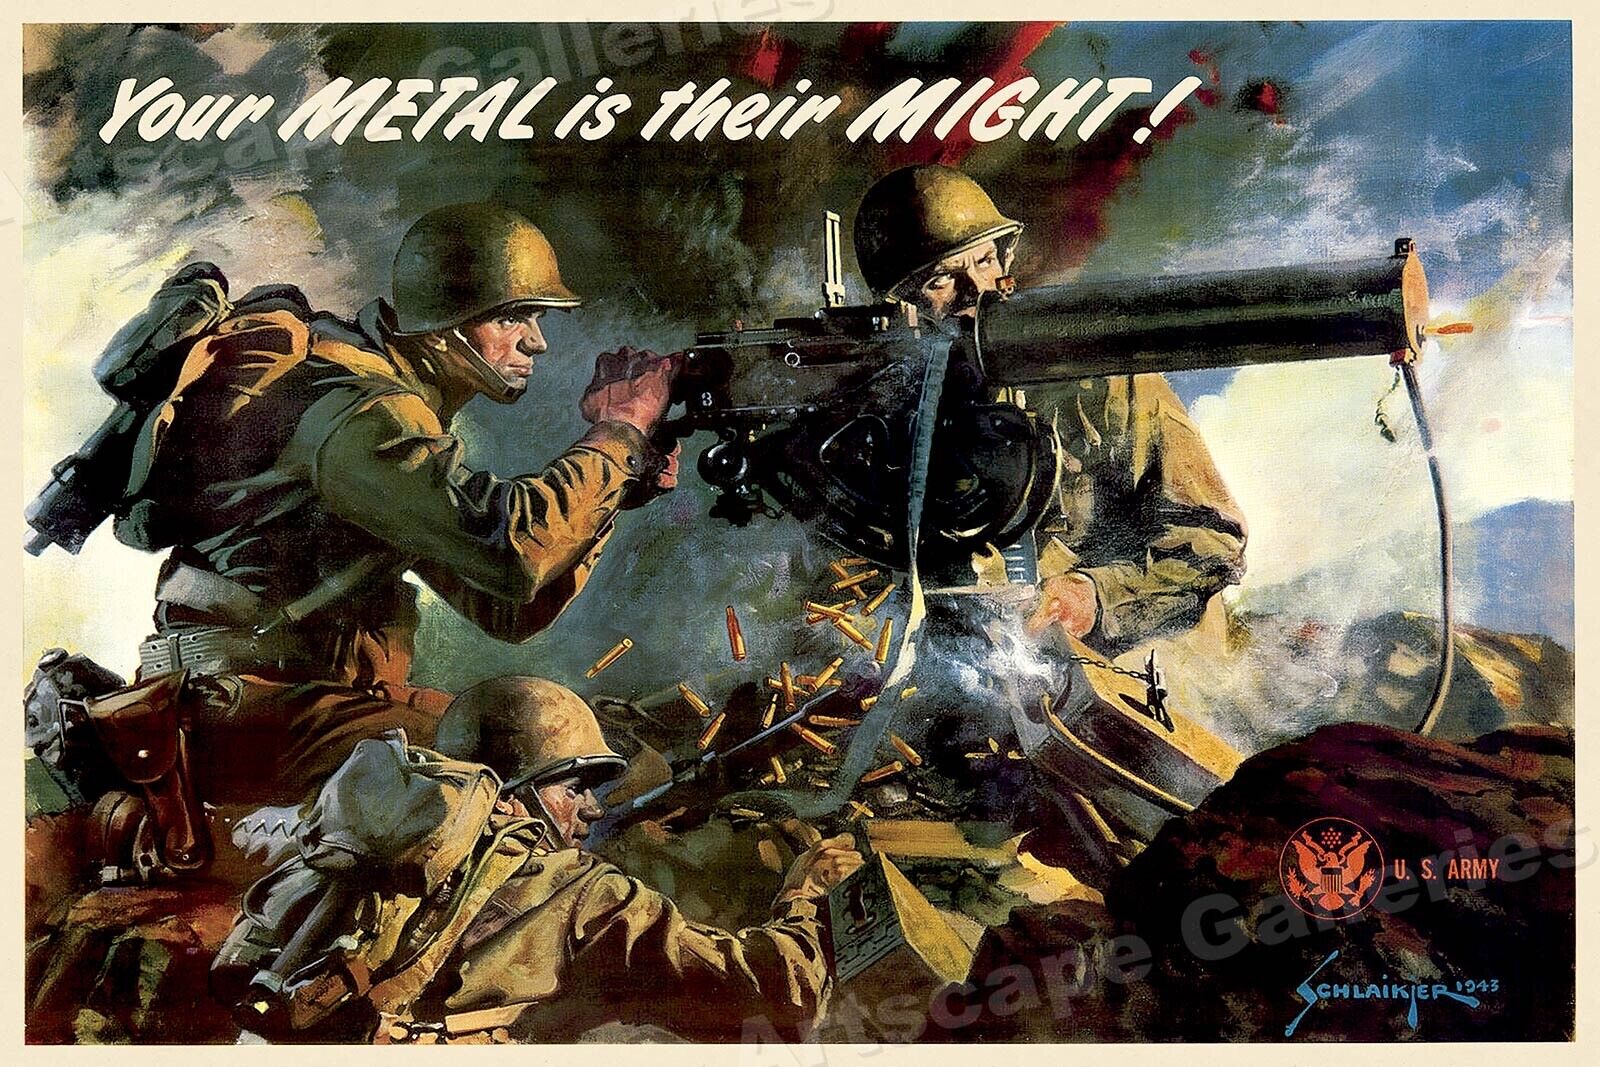 Your Metal is their Might 1943 WWII War Poster - 24x36